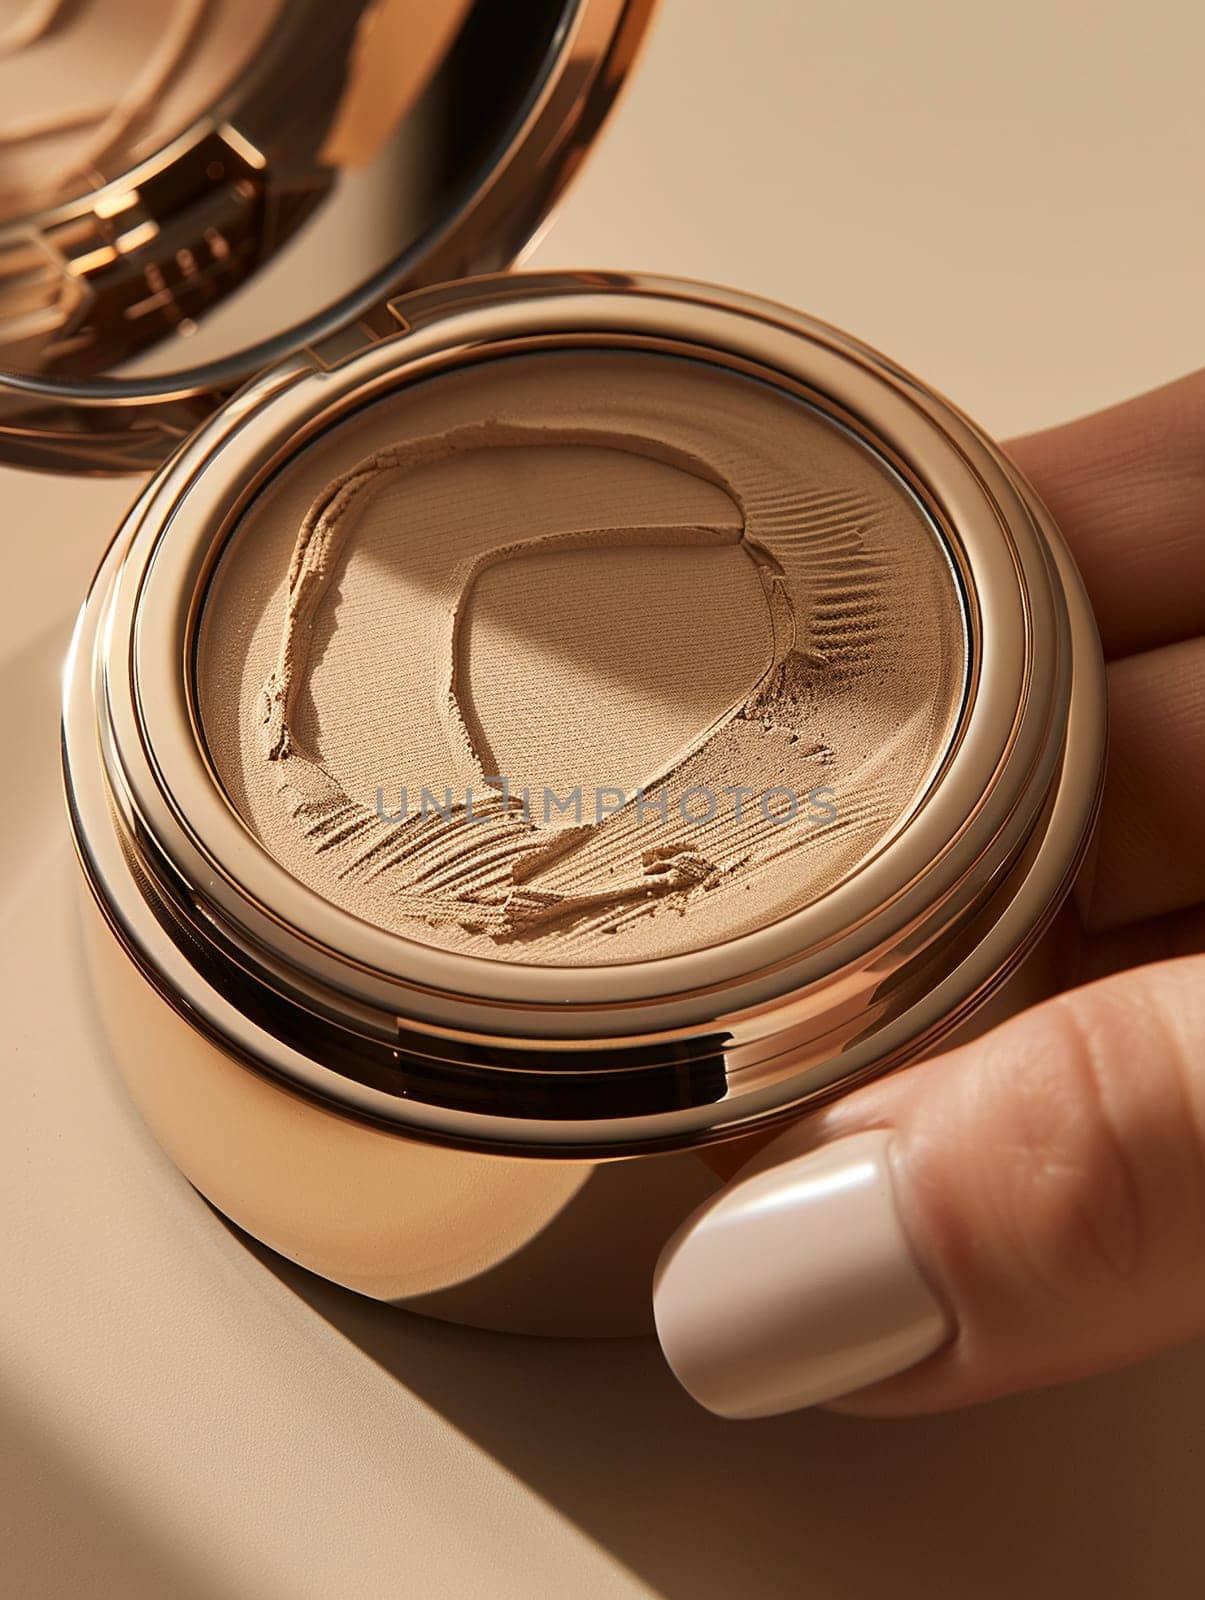 Fingers holding an artfully designed compact powder, showcasing beauty and elegance.